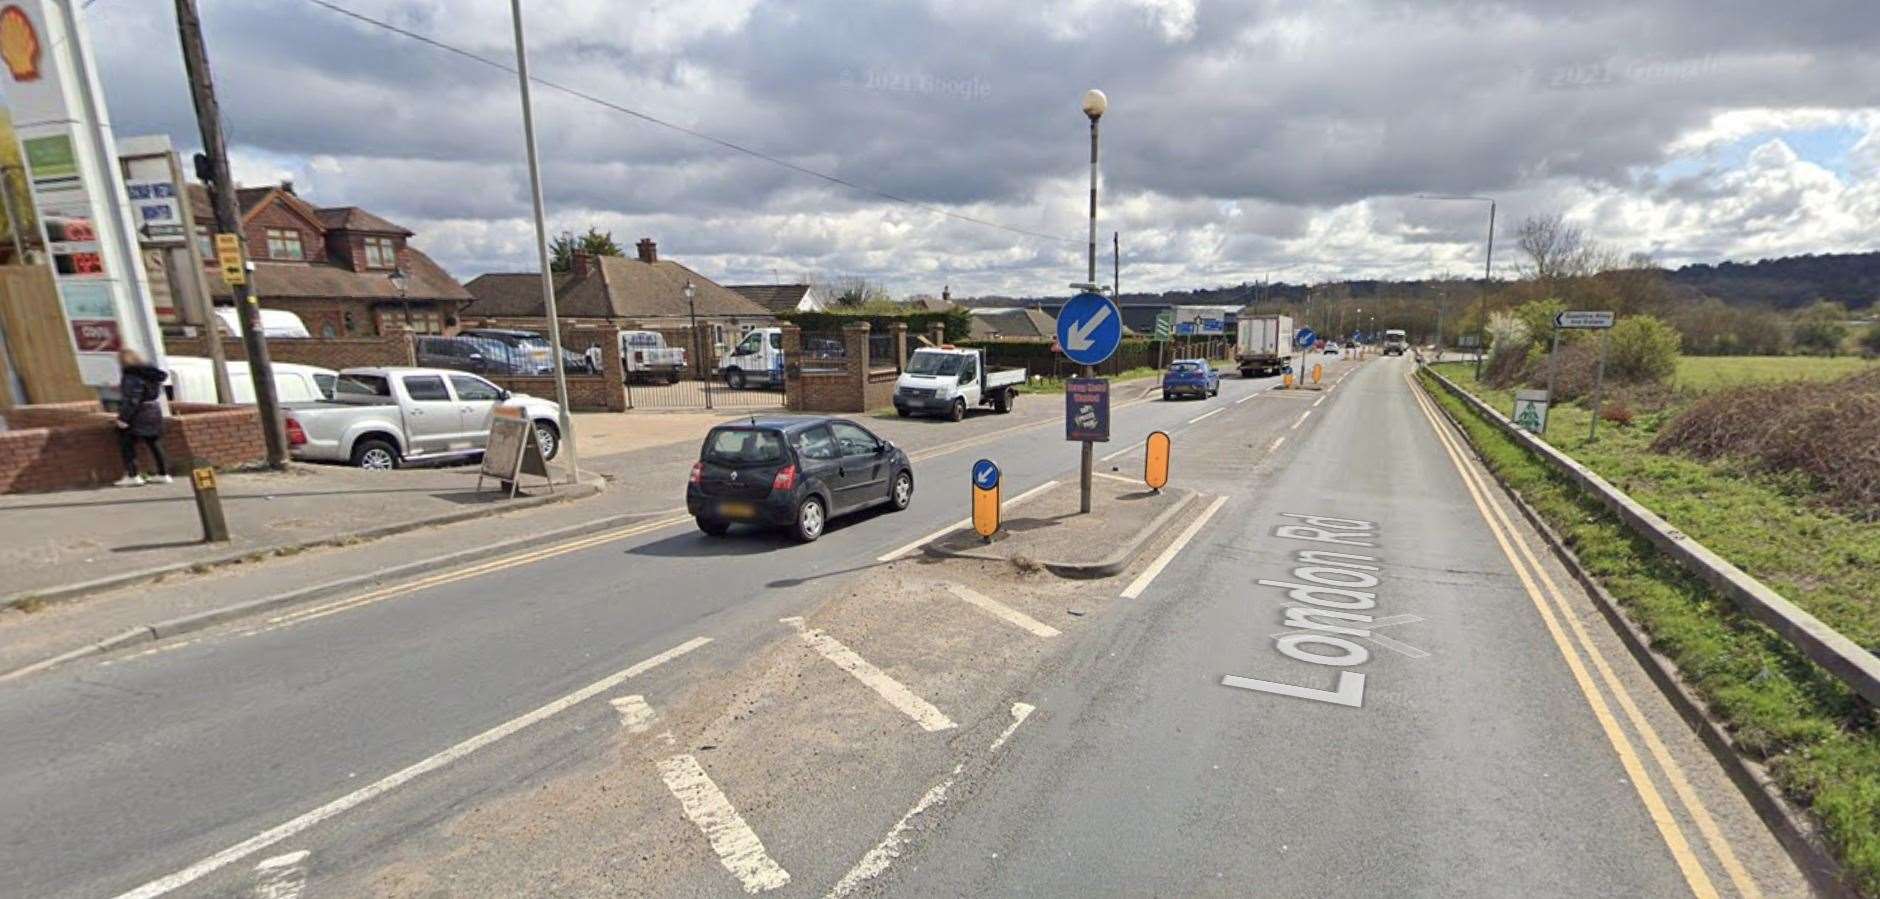 The crash happened on the A20 London Road at the junction with Gasoline Alley. Picture: Google Street View